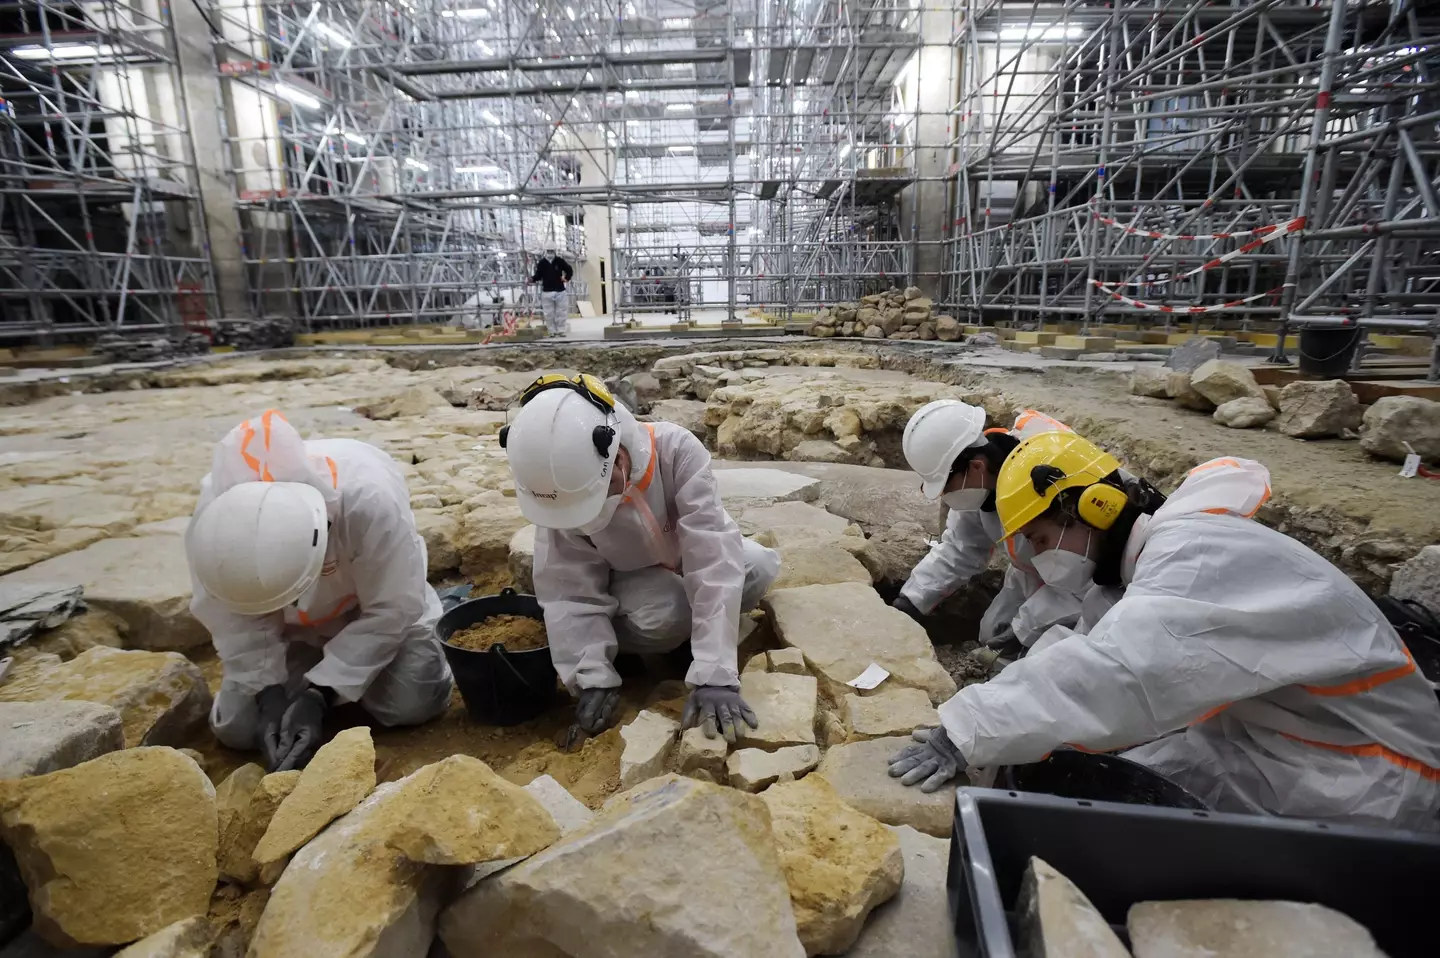 The artefacts were discovered during the restoration of Notre Dame.